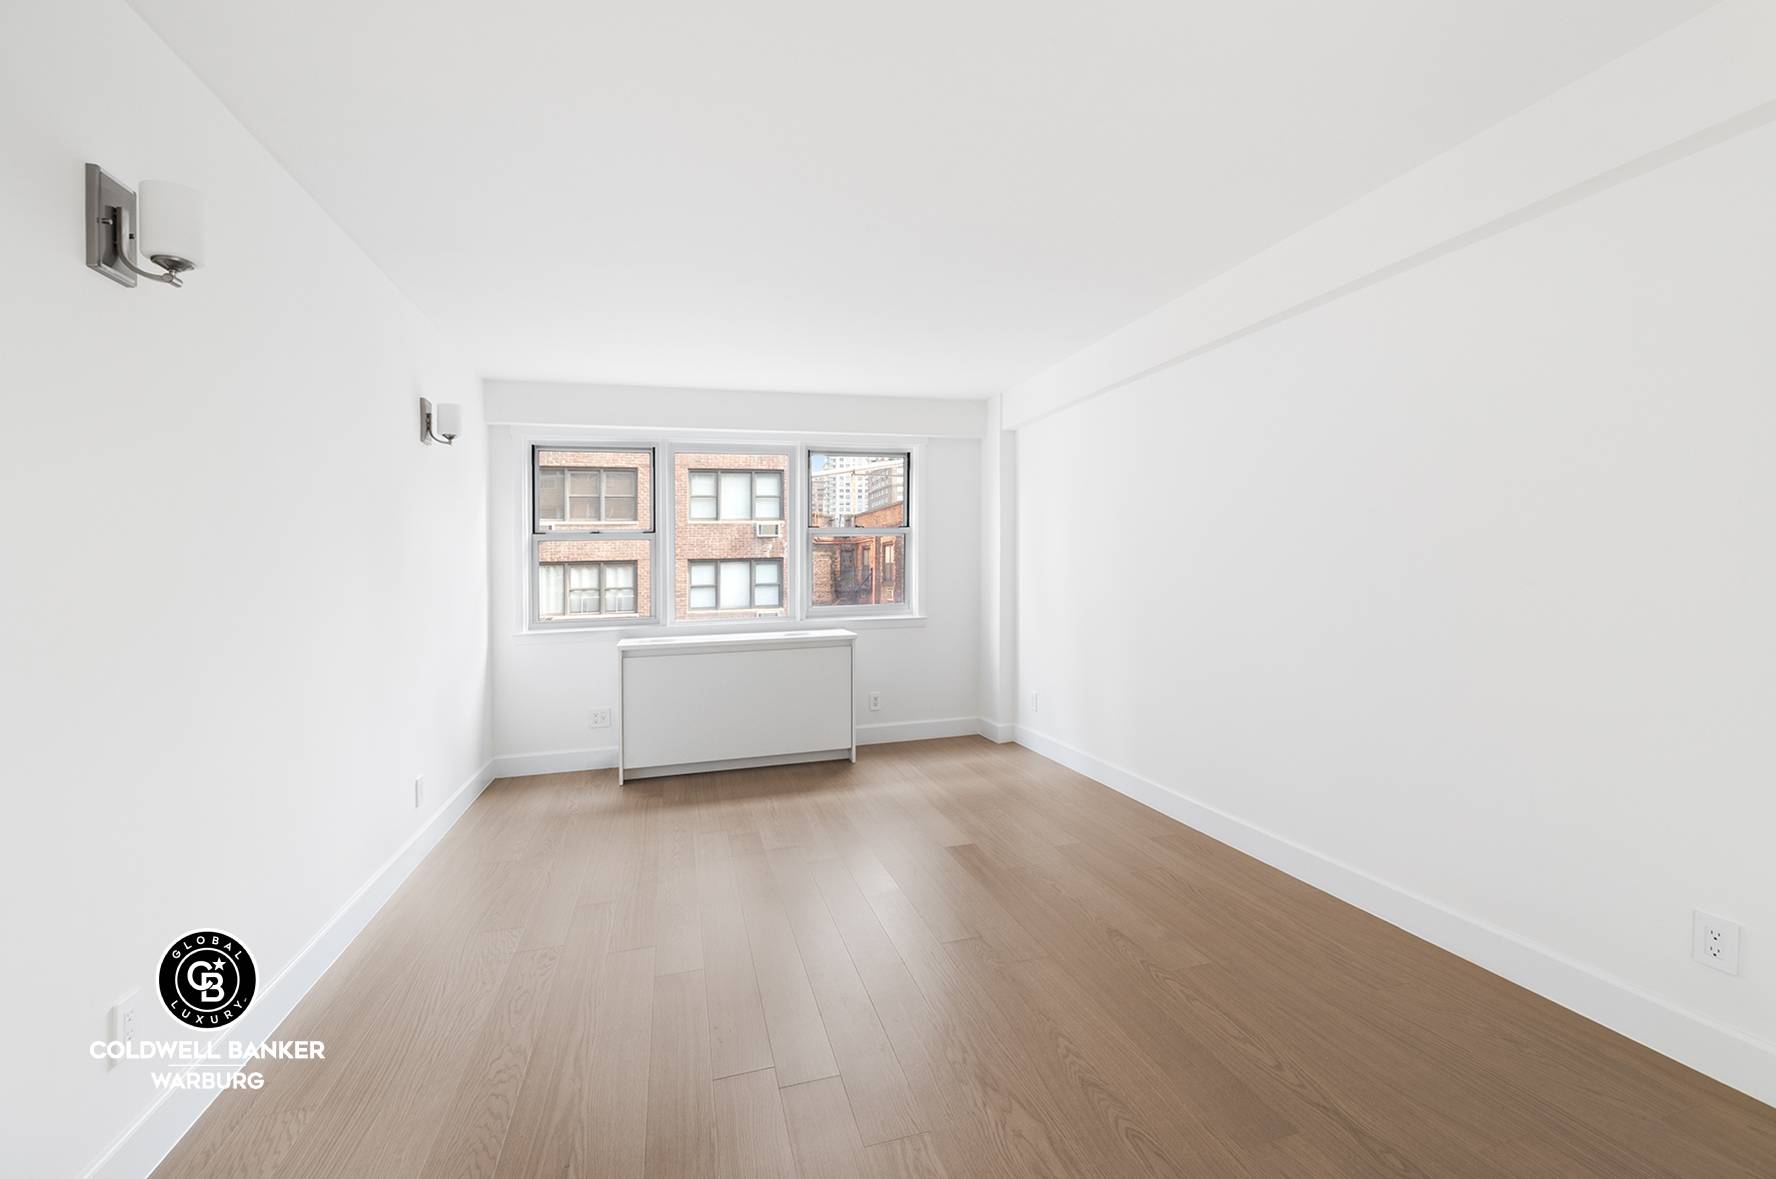 No Board approval is required for this brand newly renovated one bedroom unit in the Townsley, a full service cooperative building in Murray Hill.